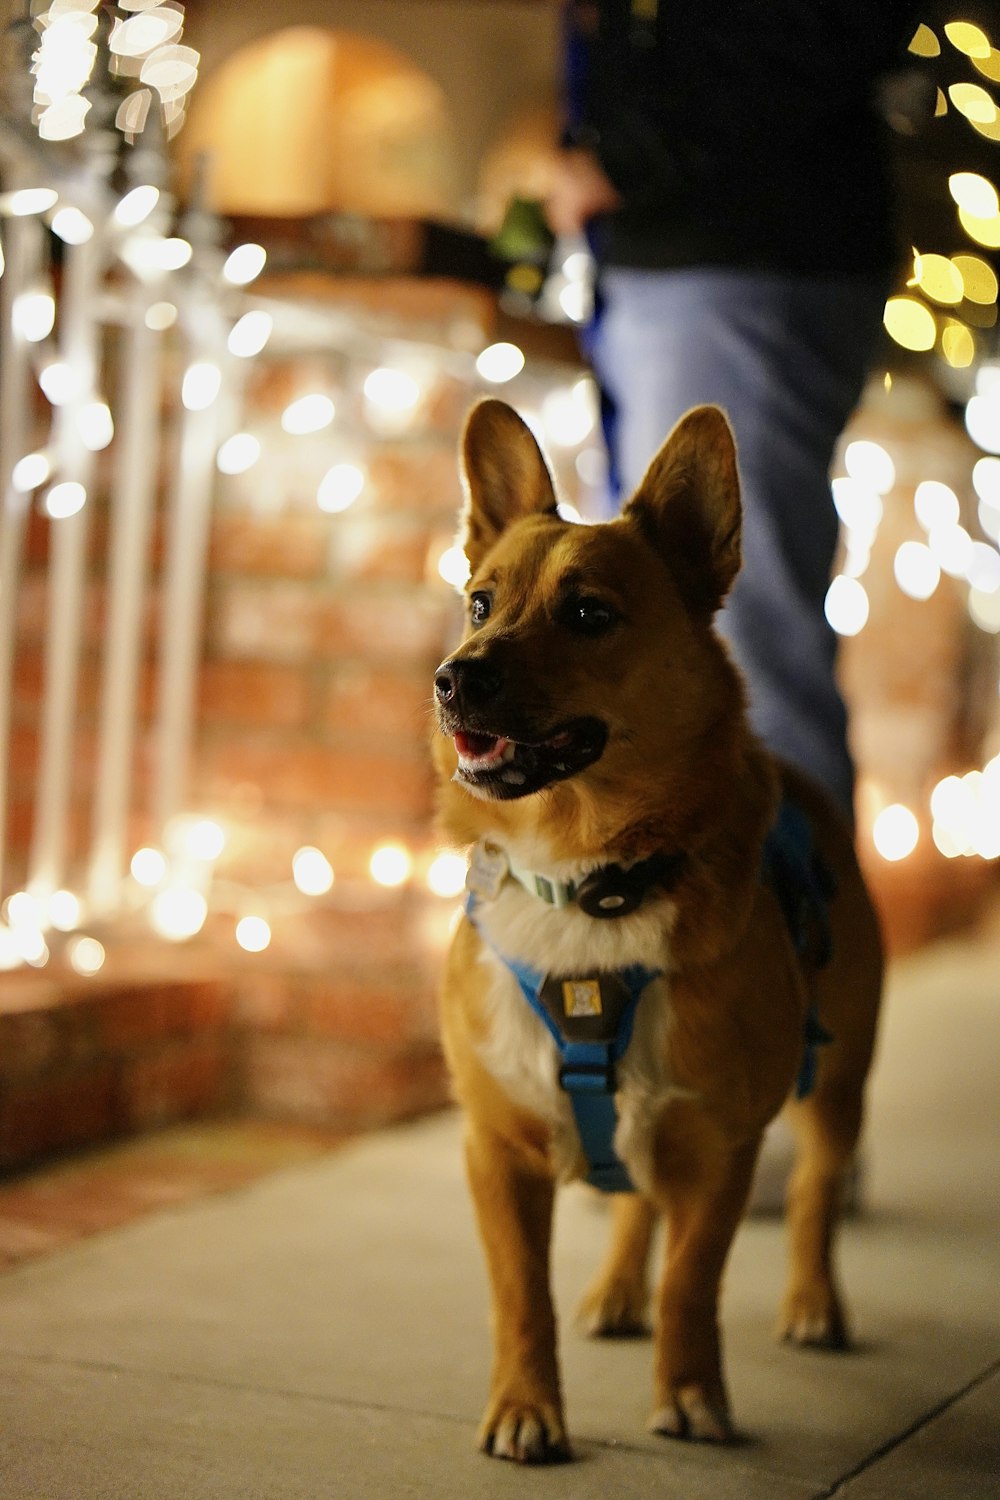 a dog standing on a sidewalk next to some lights